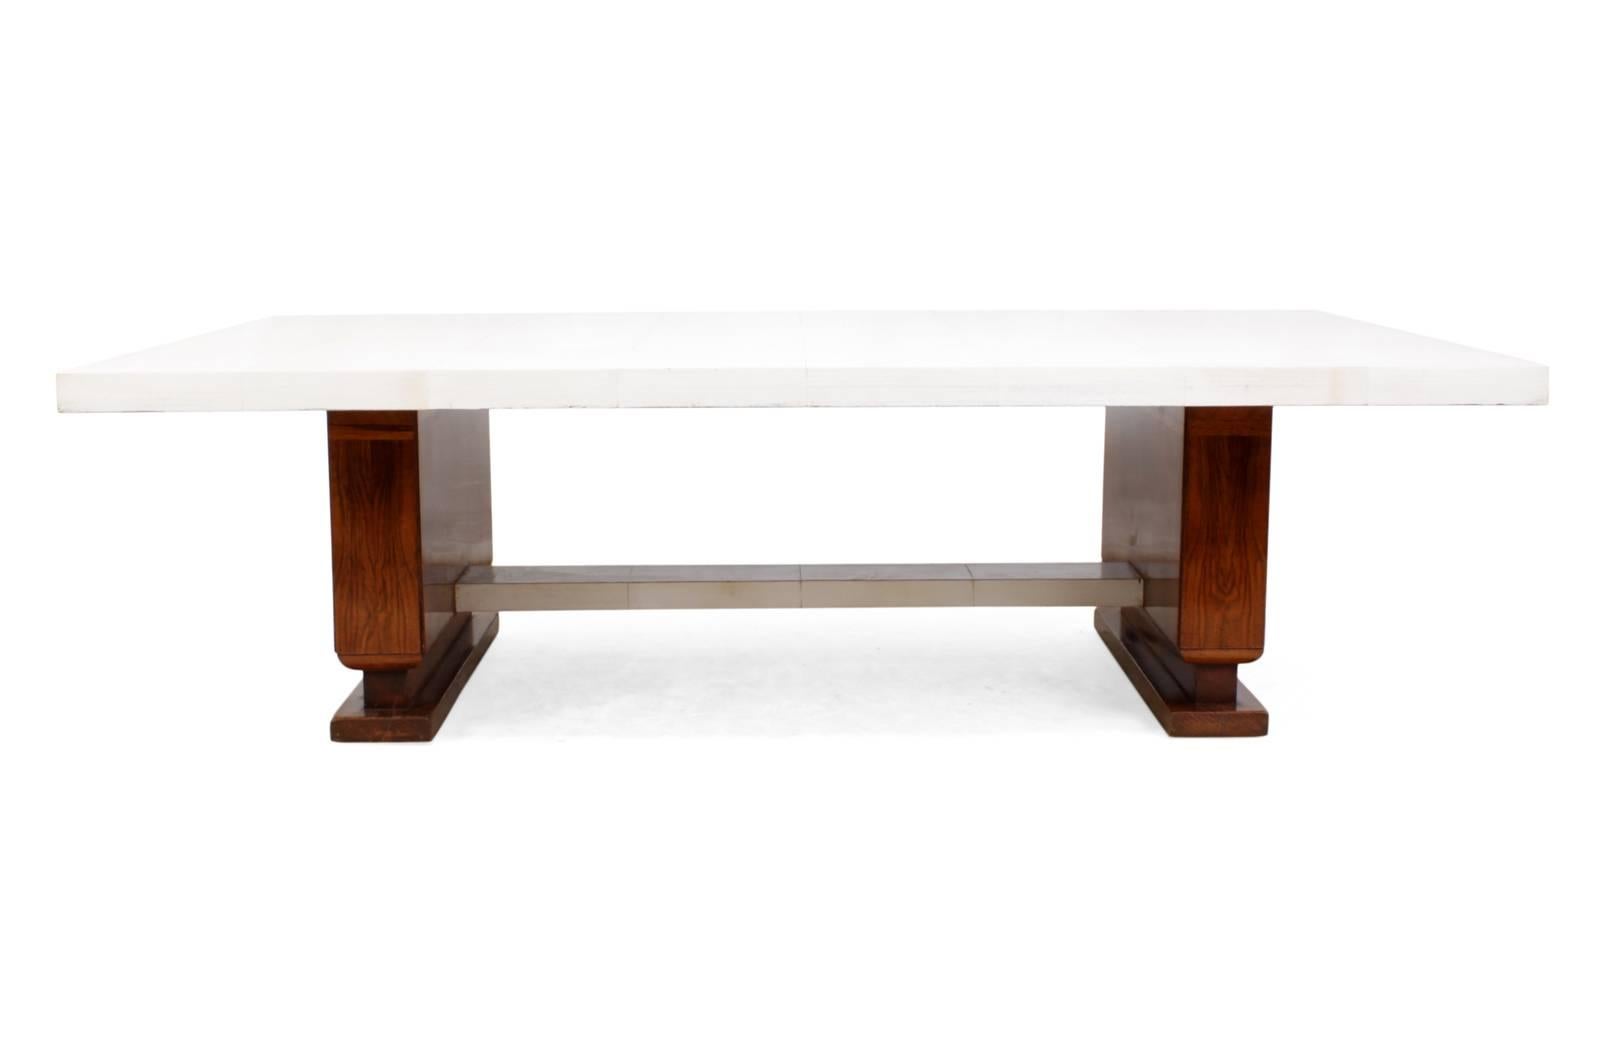 Art Deco walnut and parchment coffee table
A very good quality walnut cross banded based coffee table with parchment top and matching centre stretcher in very good condition

Age: 1930

Style: Art Deco

Material: Parchment and